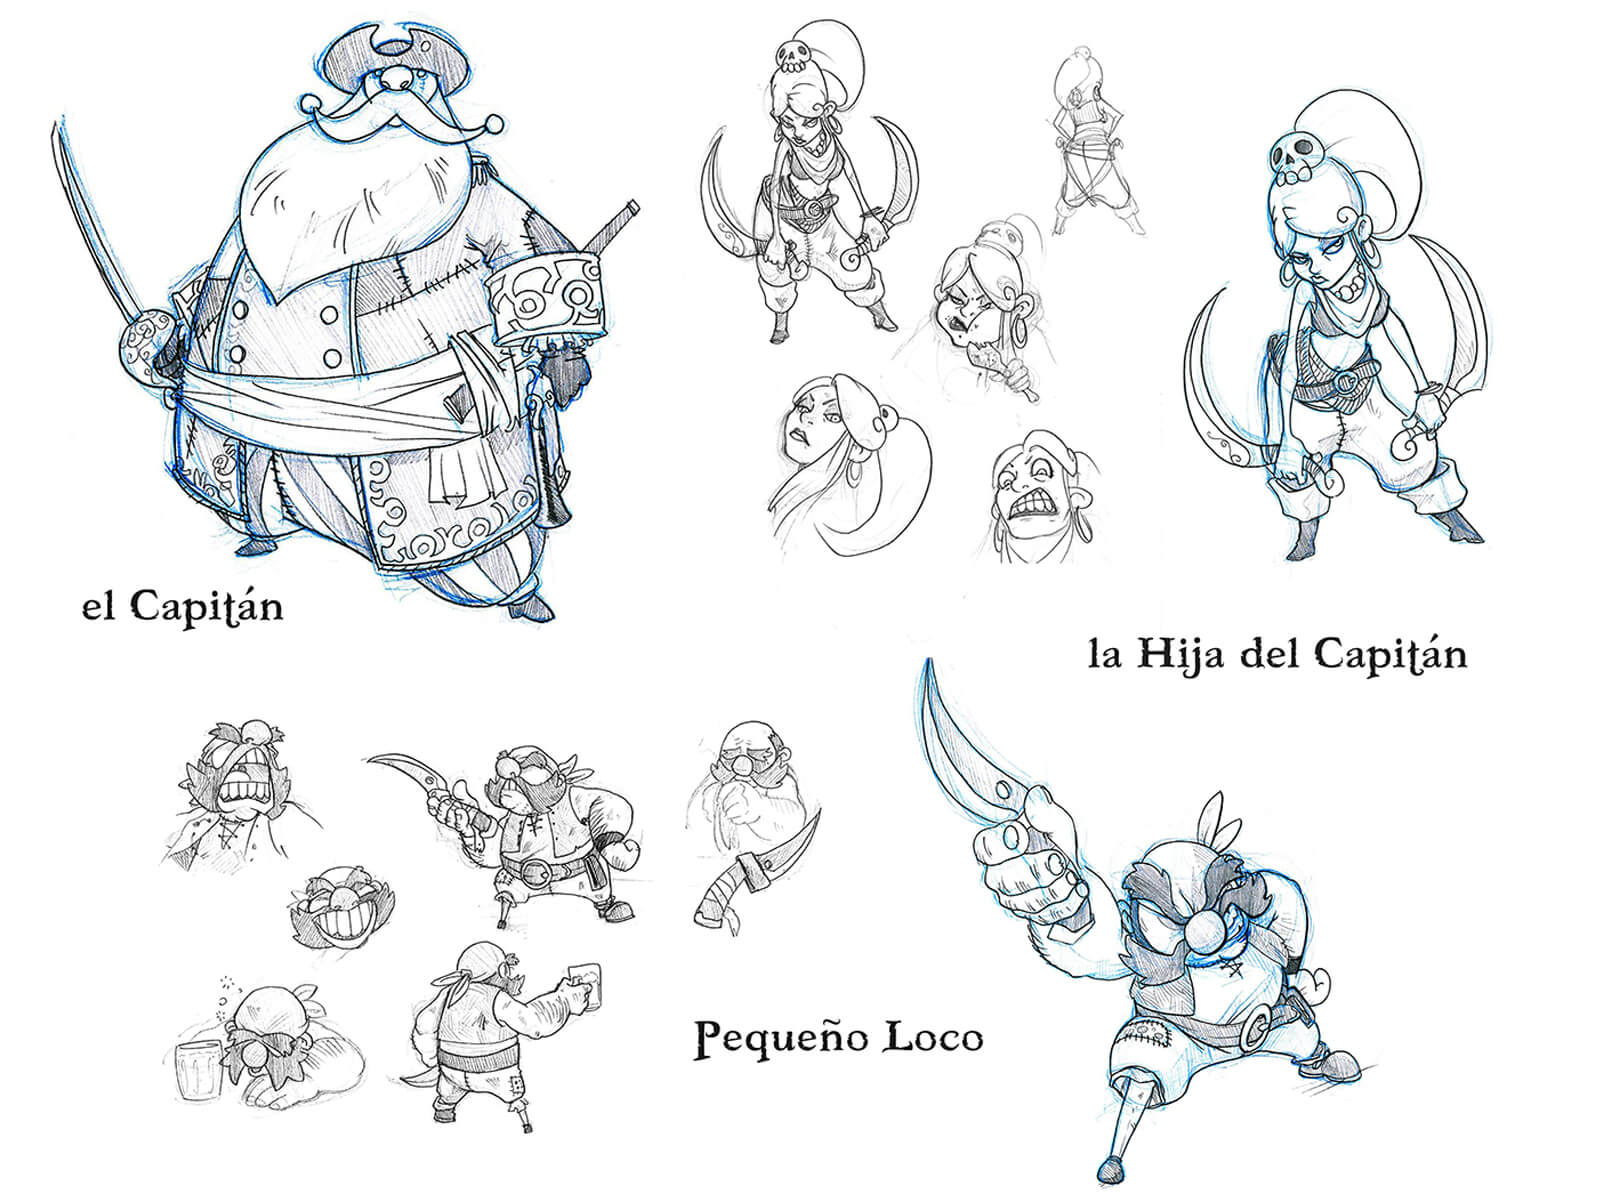 Black-and-white sketches of a rotund pirate captain, his sword-wielding daughter, and an elderly pirate with a dagger.